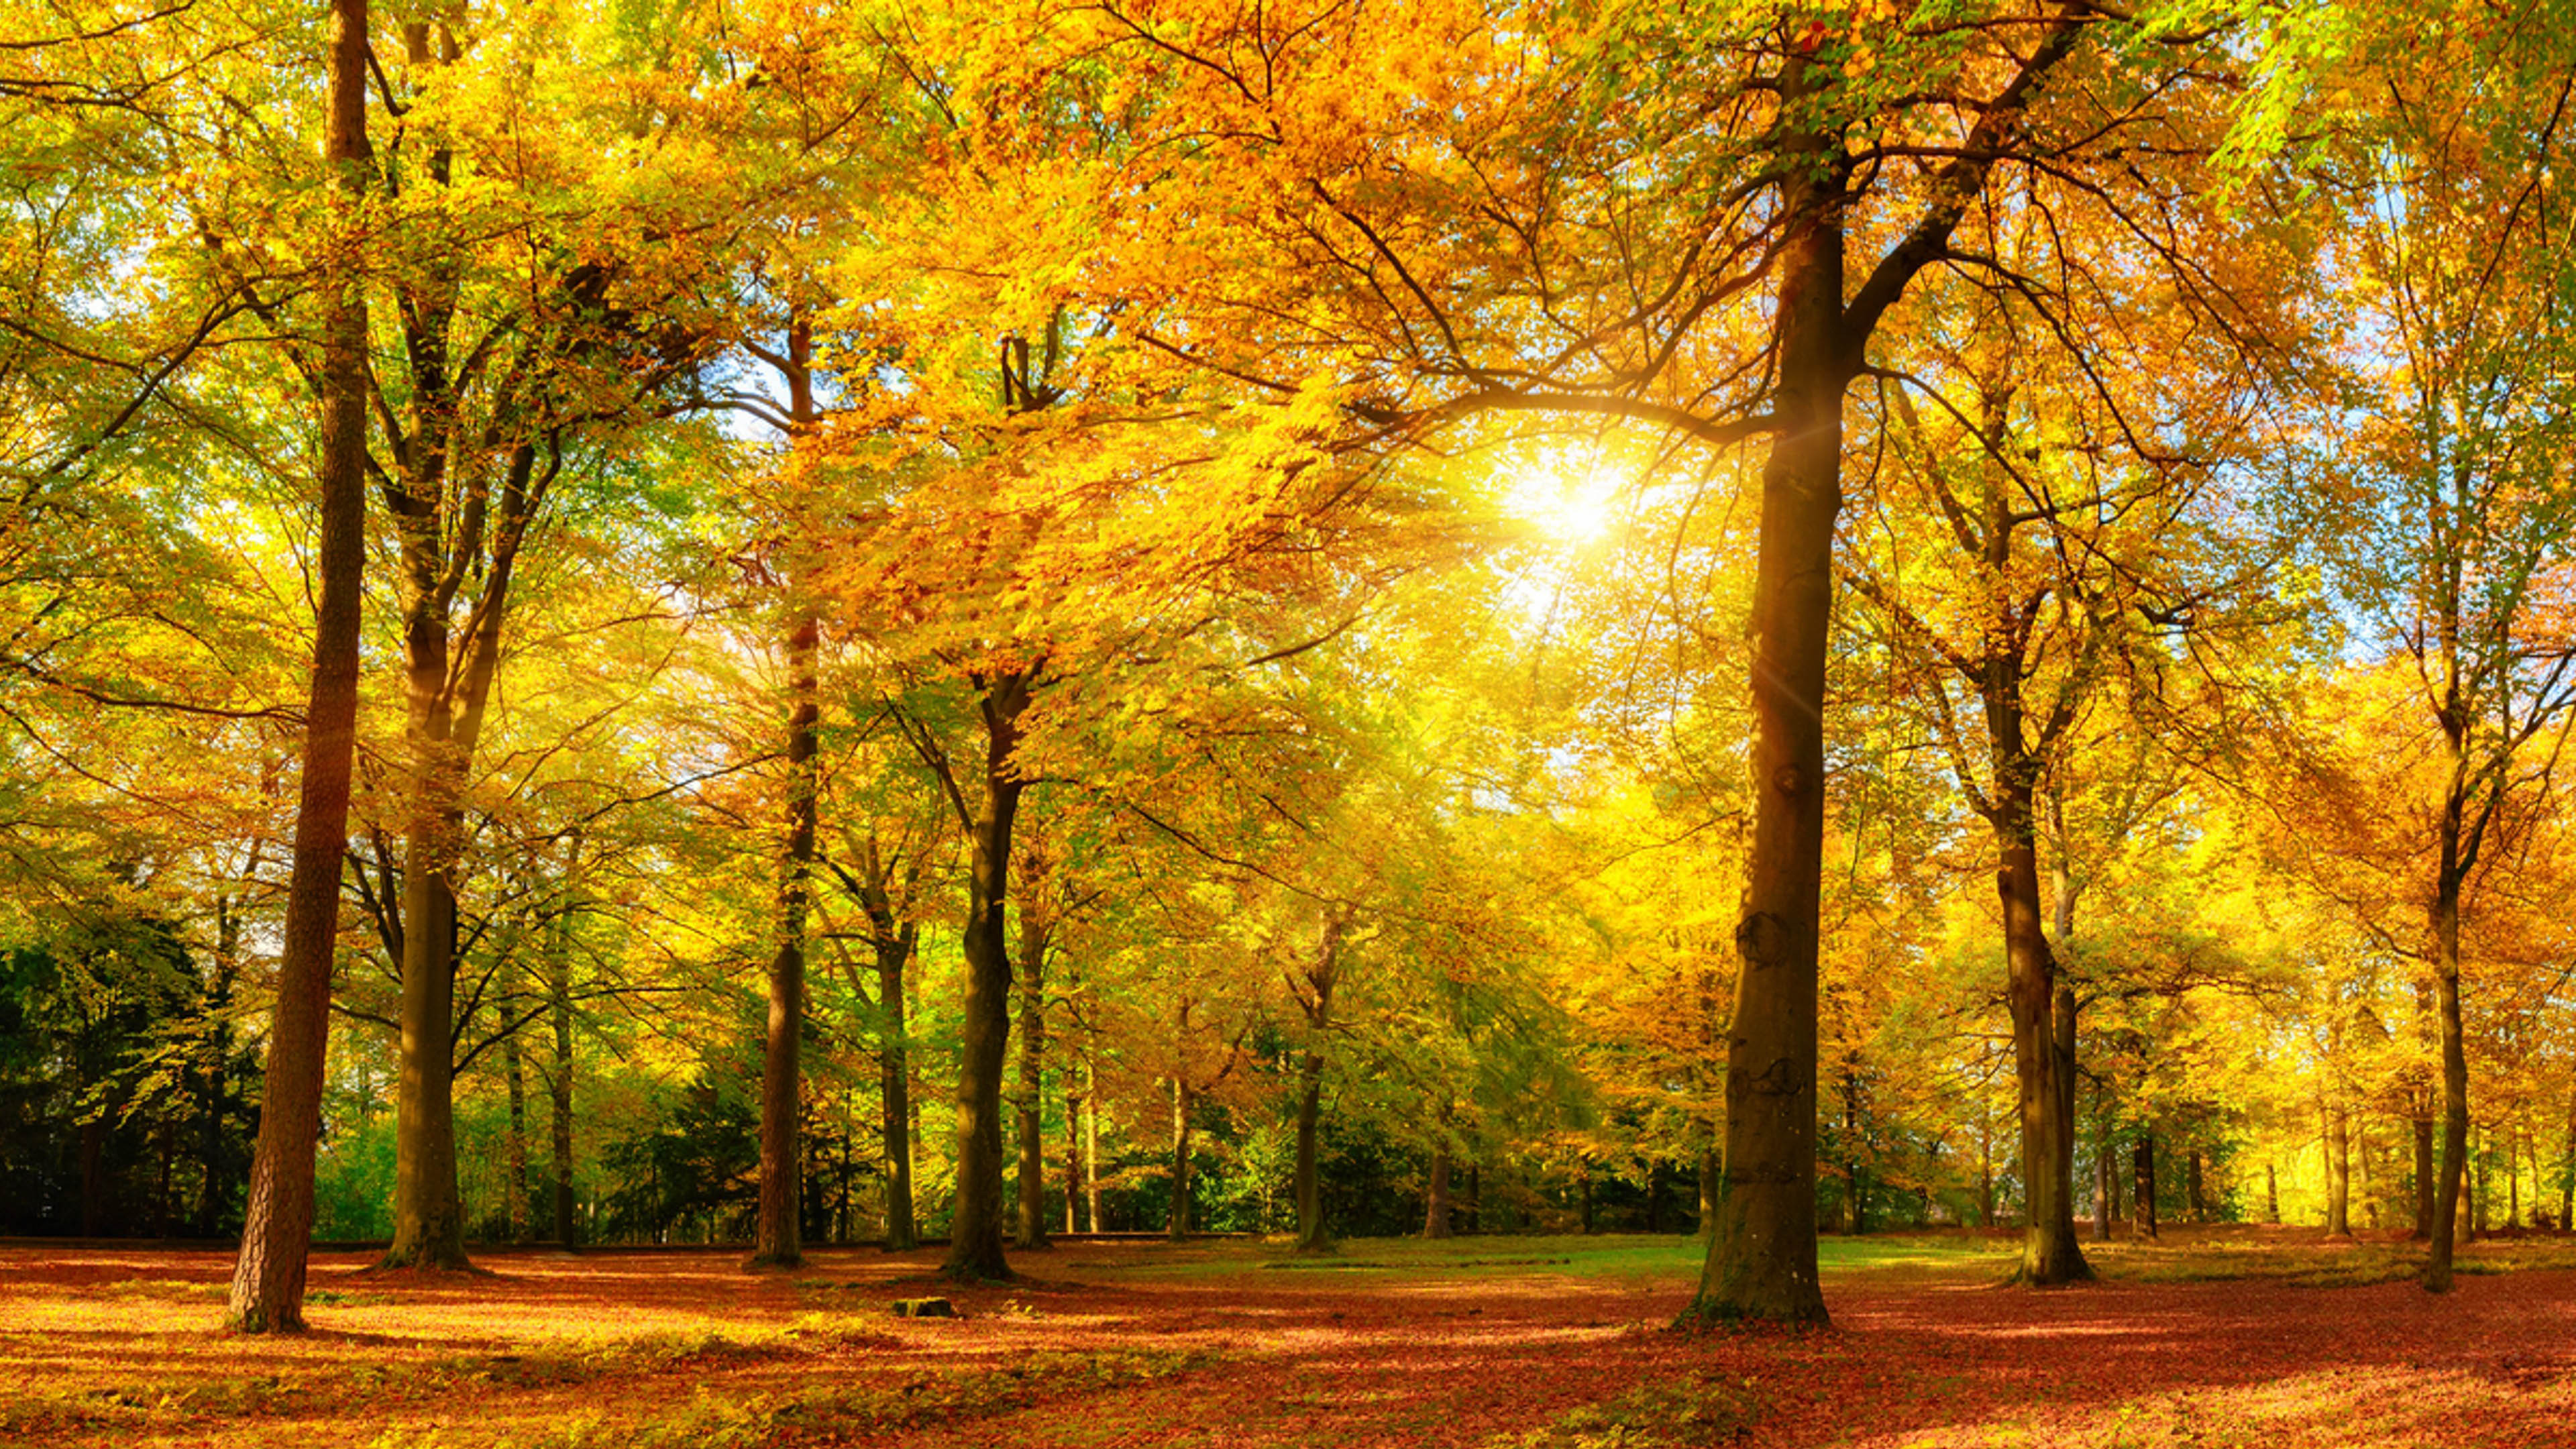 Golden Sun Autumn Forest Trees With Golden Yellow Leaves Landscape Wallpaper  Hd : 